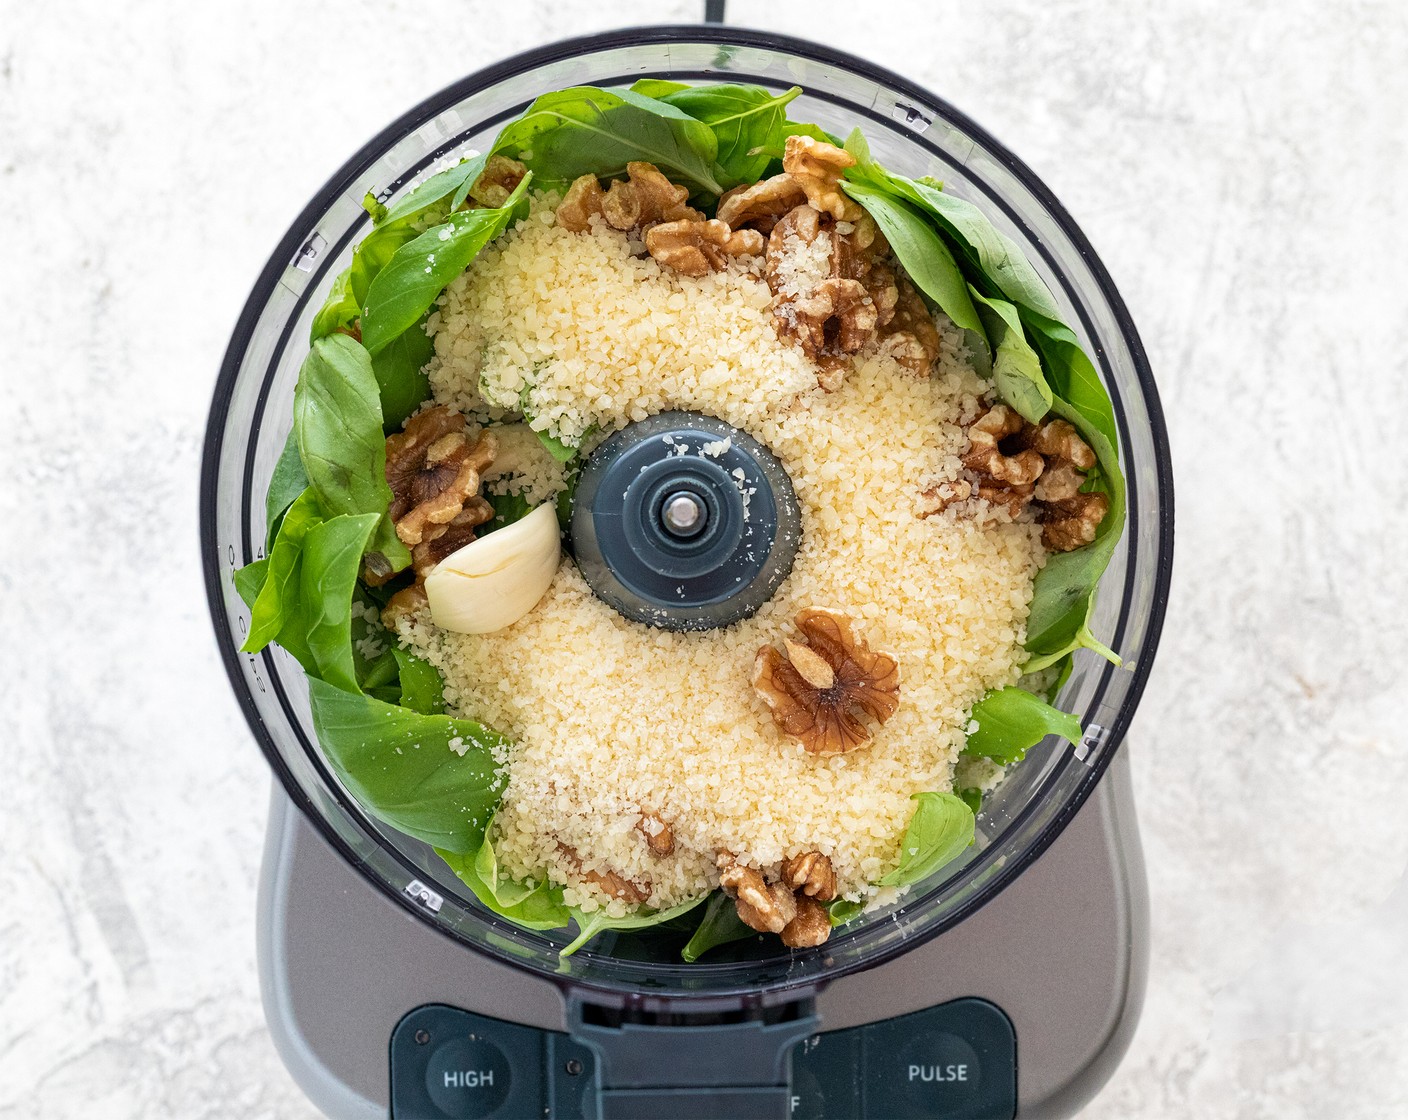 step 1 In a food processor, add Fresh Baby Spinach (4 cups), Fresh Basil Leaves (2 cups), Garlic (3 cloves), Walnut (1/2 cup), Parmesan Cheese (1/2 cup), and Kosher Salt (1/2 tsp). Process pesto by pulsing 5 to 7 times to help break down the leaves and garlic.